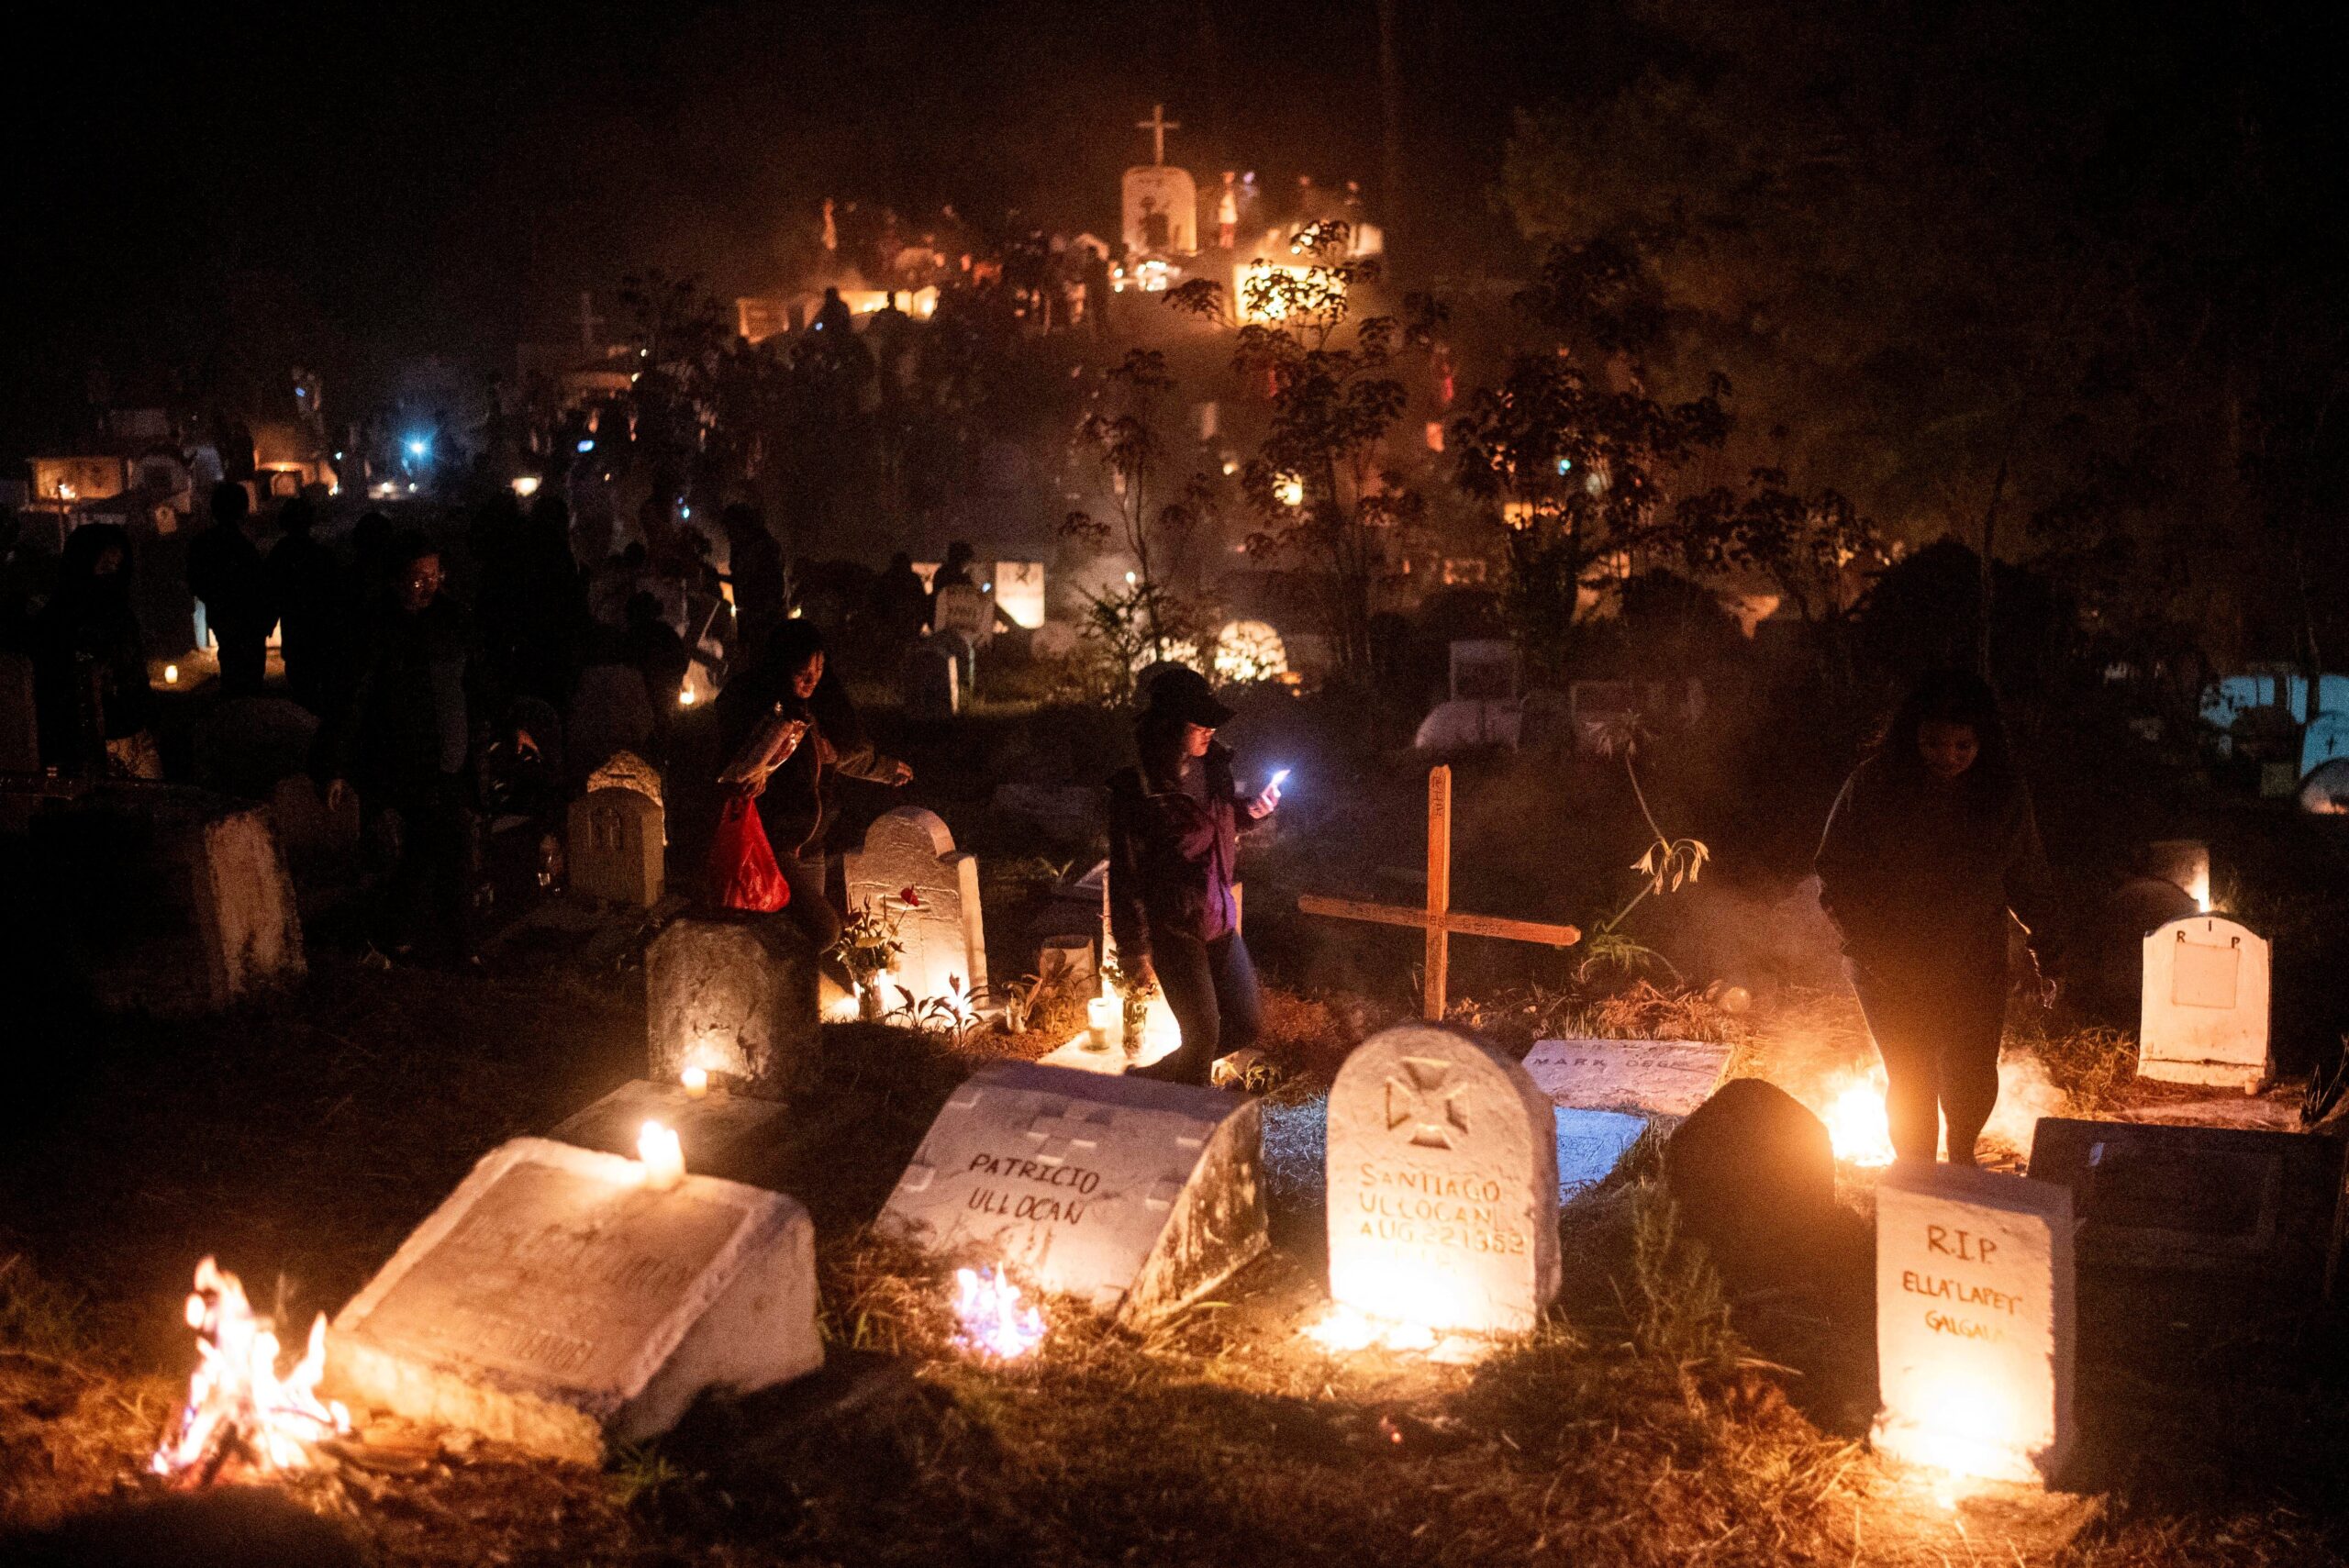 People light candles and burn pine woods as they visit the graves of departed loved ones on All Saints' Day, in Sagada town, Mountain Province, Philippines, Nov. 1, 2023. (OSV News photo/Lisa Marie David, Reuters)